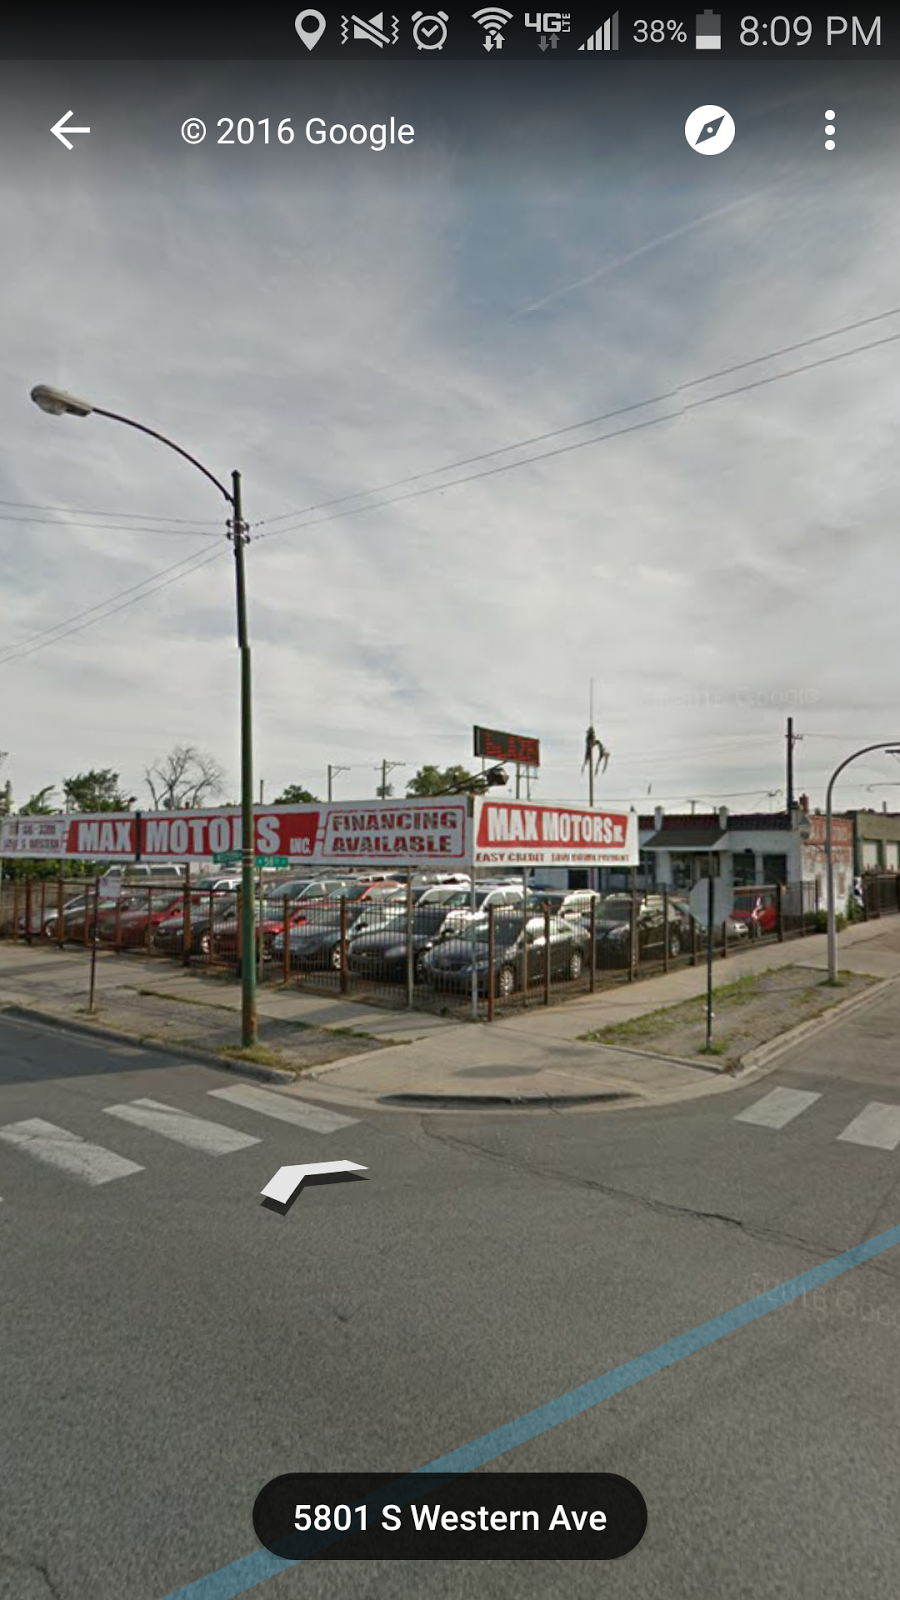 Max Motors Inc | 5759 S Western Ave, Chicago, IL 60636, USA | Phone: (773) 436-3300